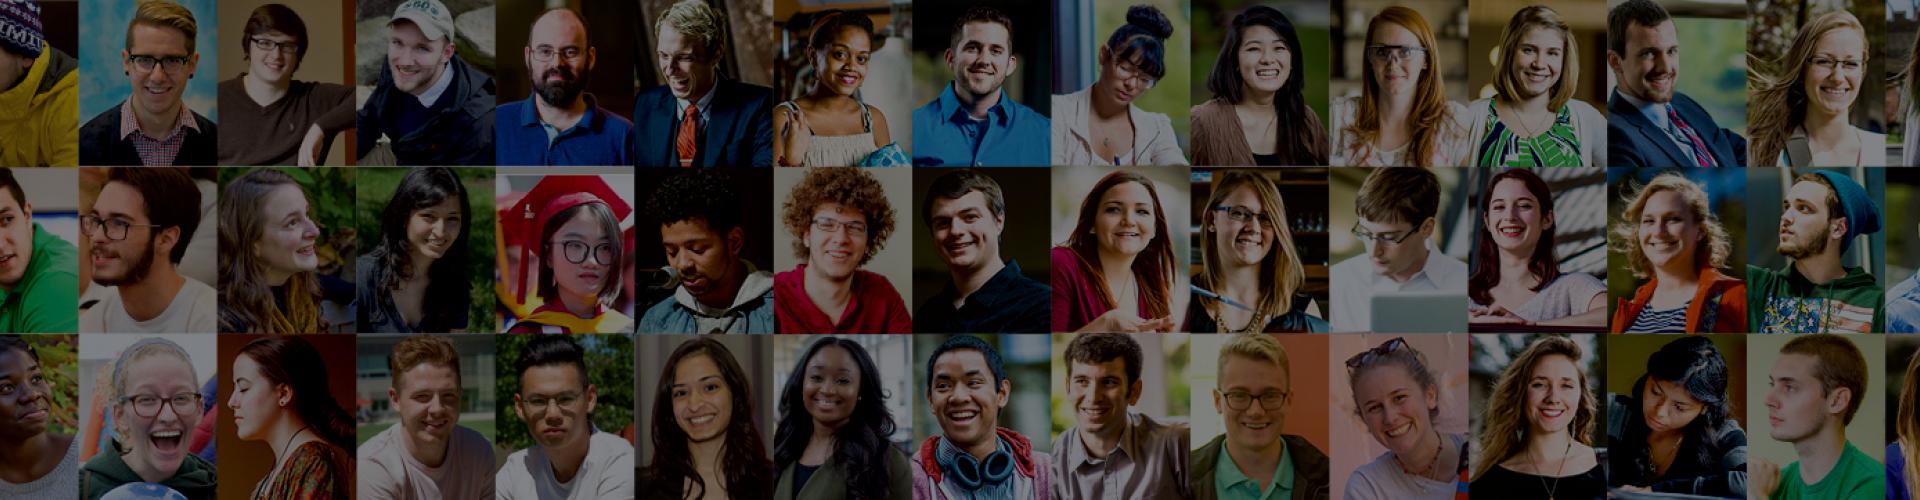 A header of different student portrait